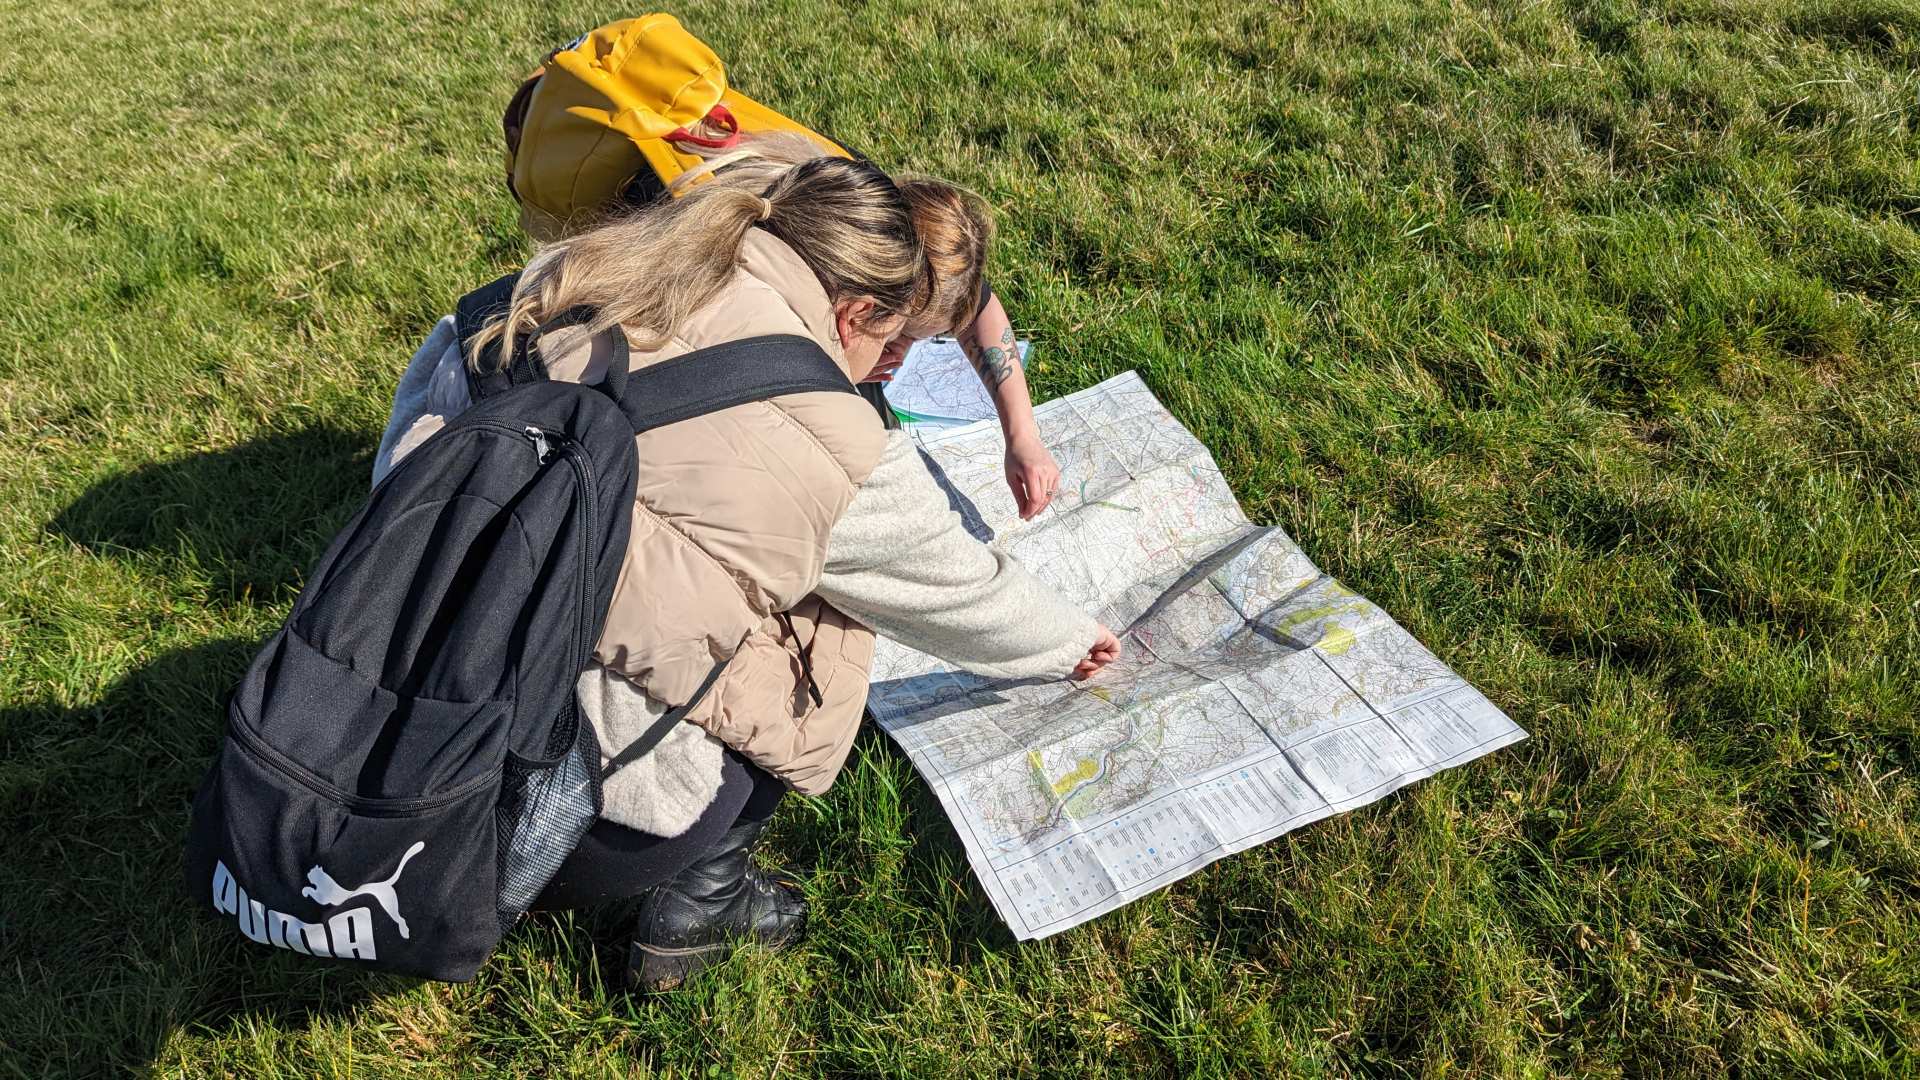 Checking our grid references on an opened-up paper map while out on the annual training walk.